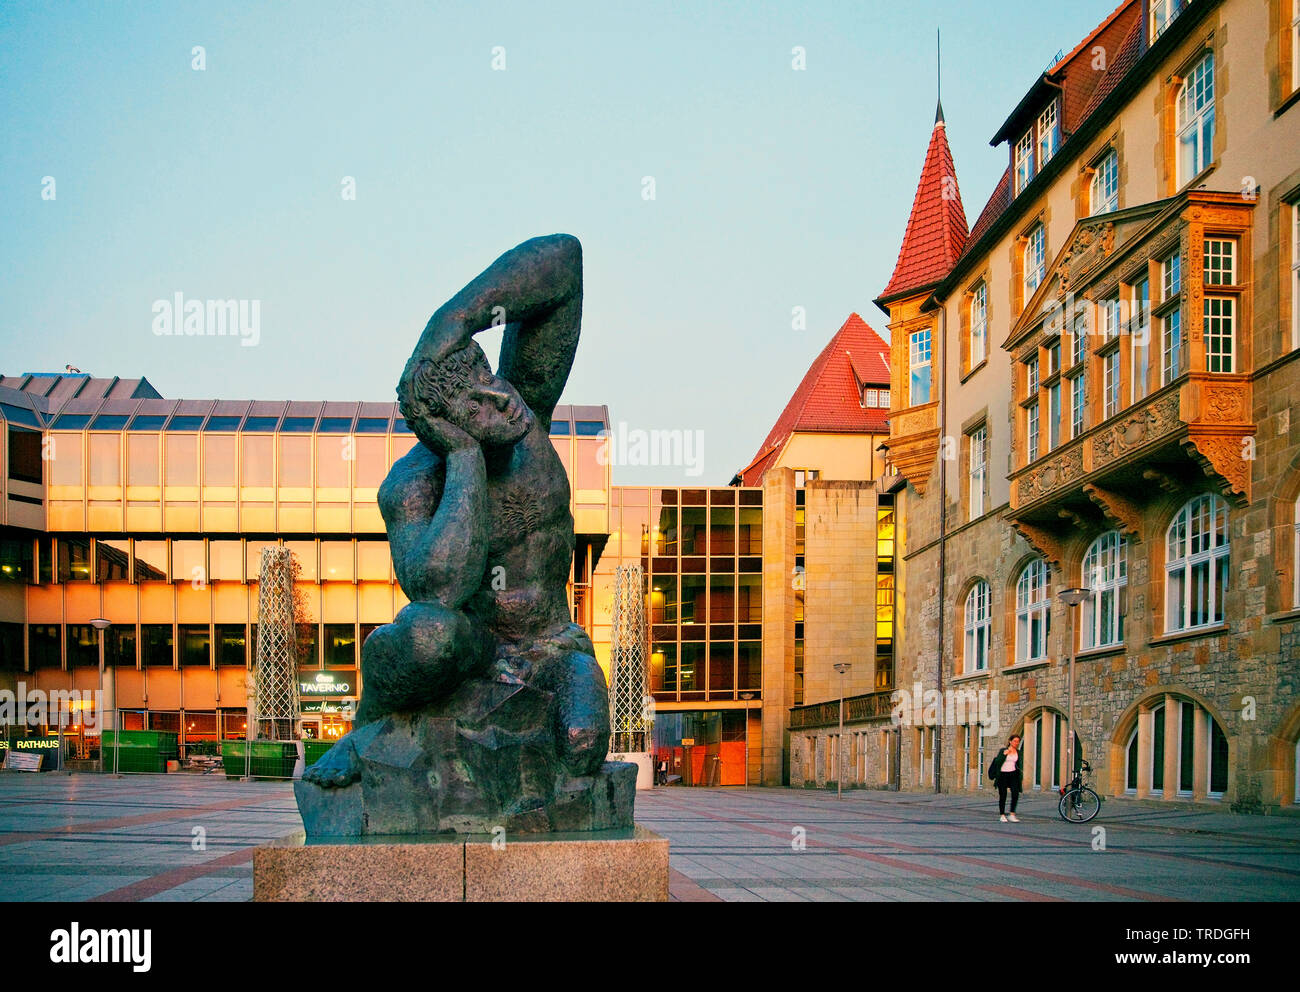 new and old town hall with sculpture Passione per l'arte, Germany, North Rhine-Westphalia, East Westphalia, Bielefeld Stock Photo